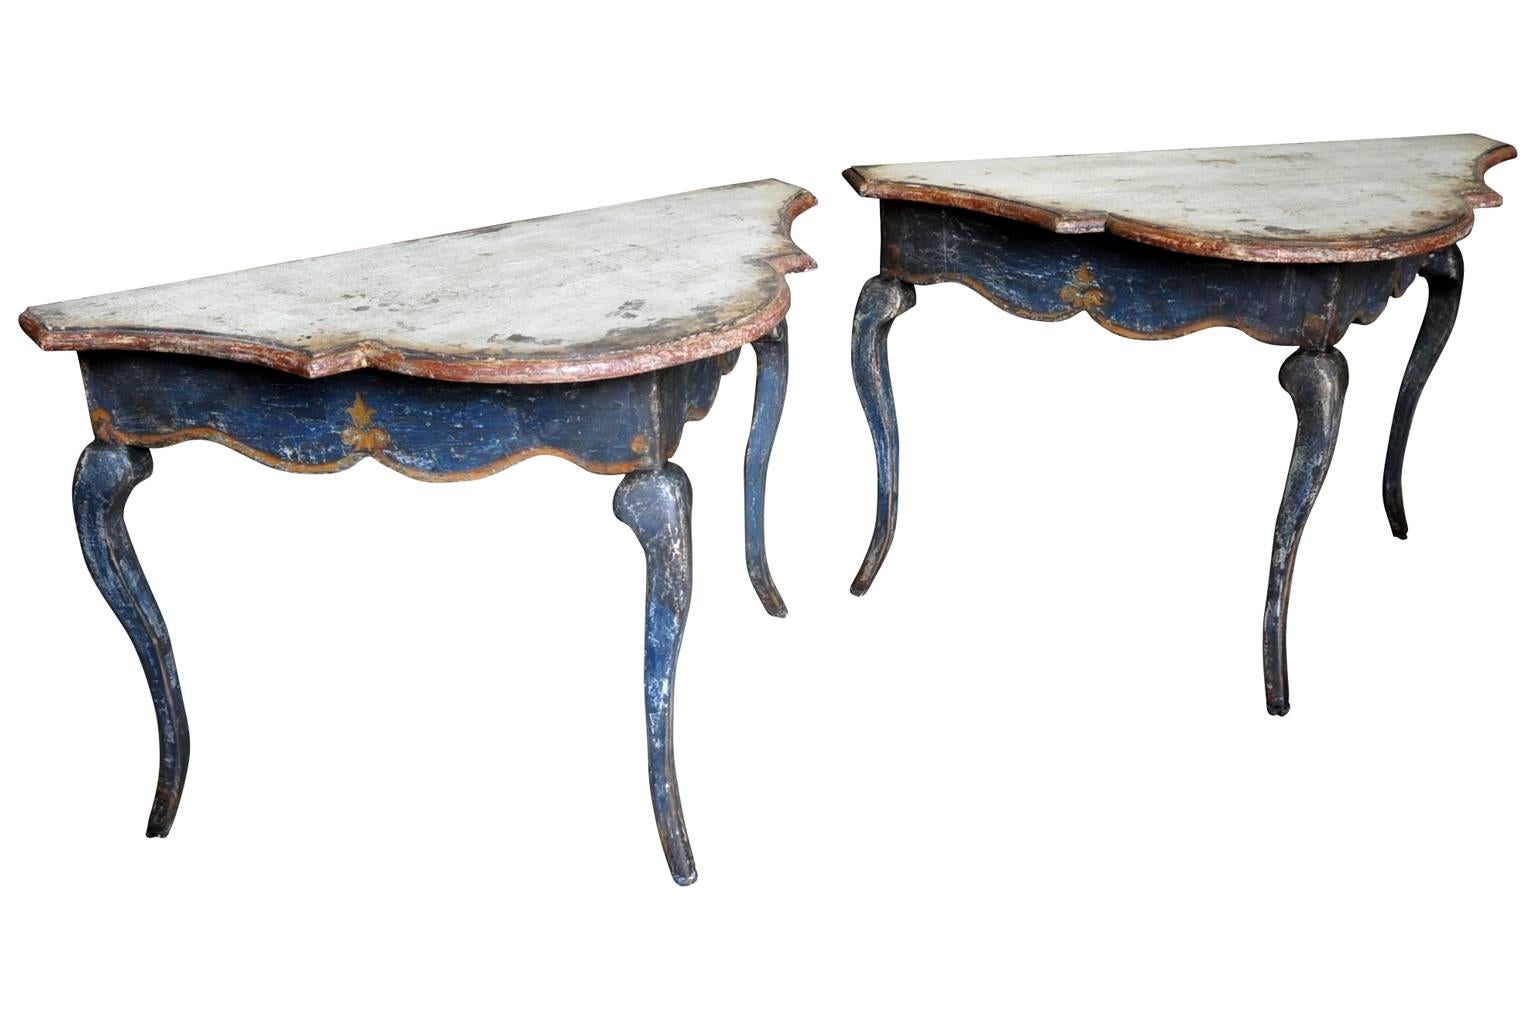 A wonderful pair of Venetian 17th century style painted console tables - demilunes, constructed from antique wood and artistically hand-painted. Wonderful finish and texture - very sumptuous color.